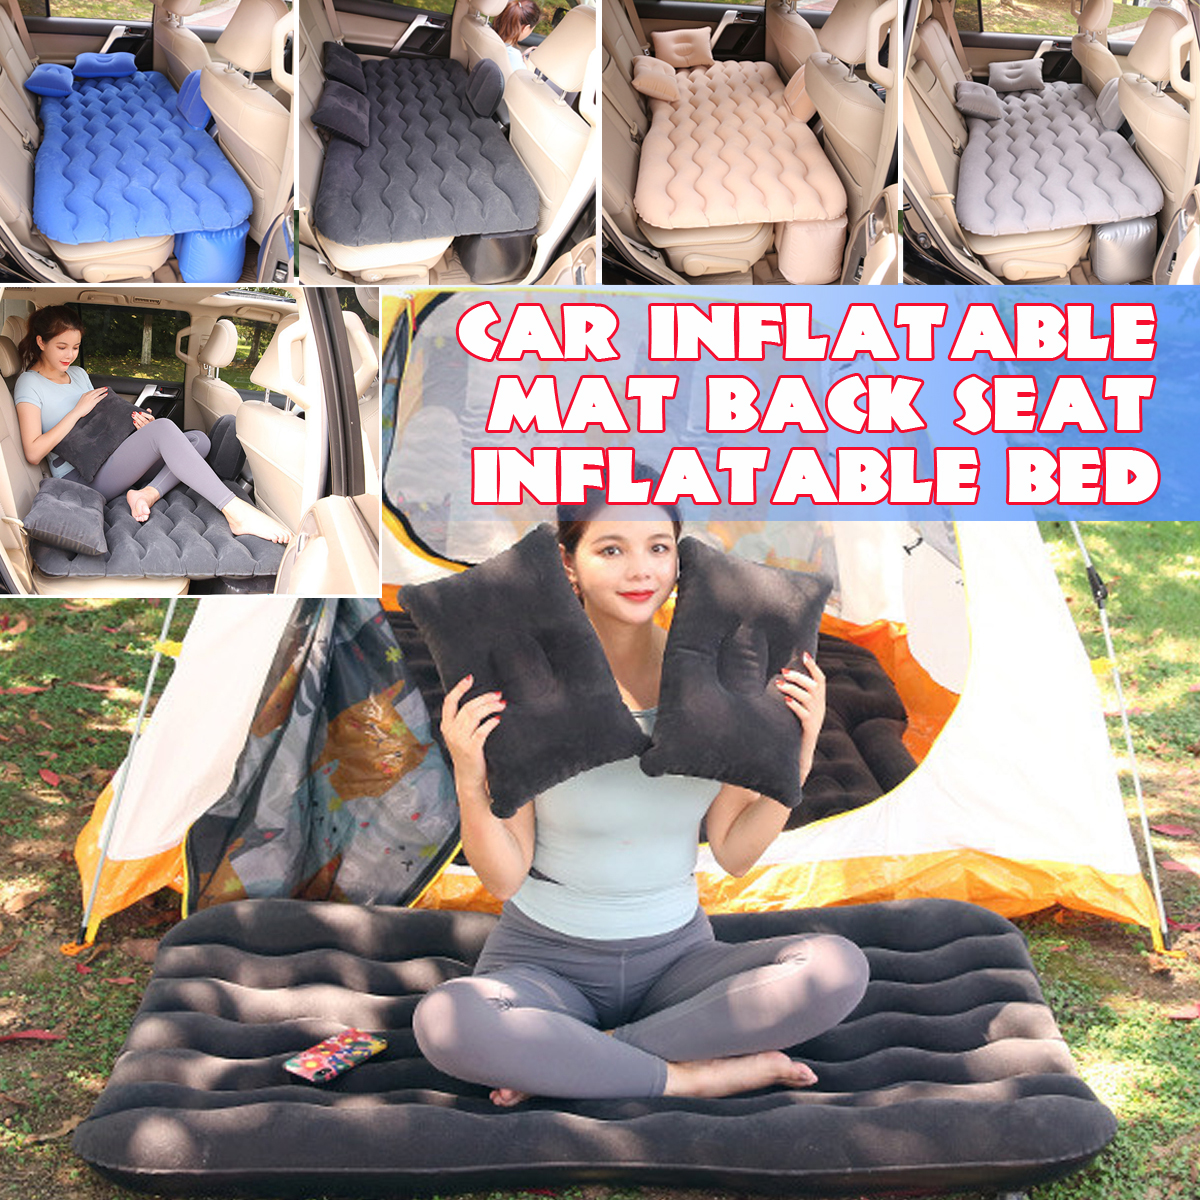 Car-Inflatable-Mat-Outdoor-Traveling-Air-Mattresses-Camping-Folding-Sleeping-Bed-with-Pillows-and-Pu-1612981-1